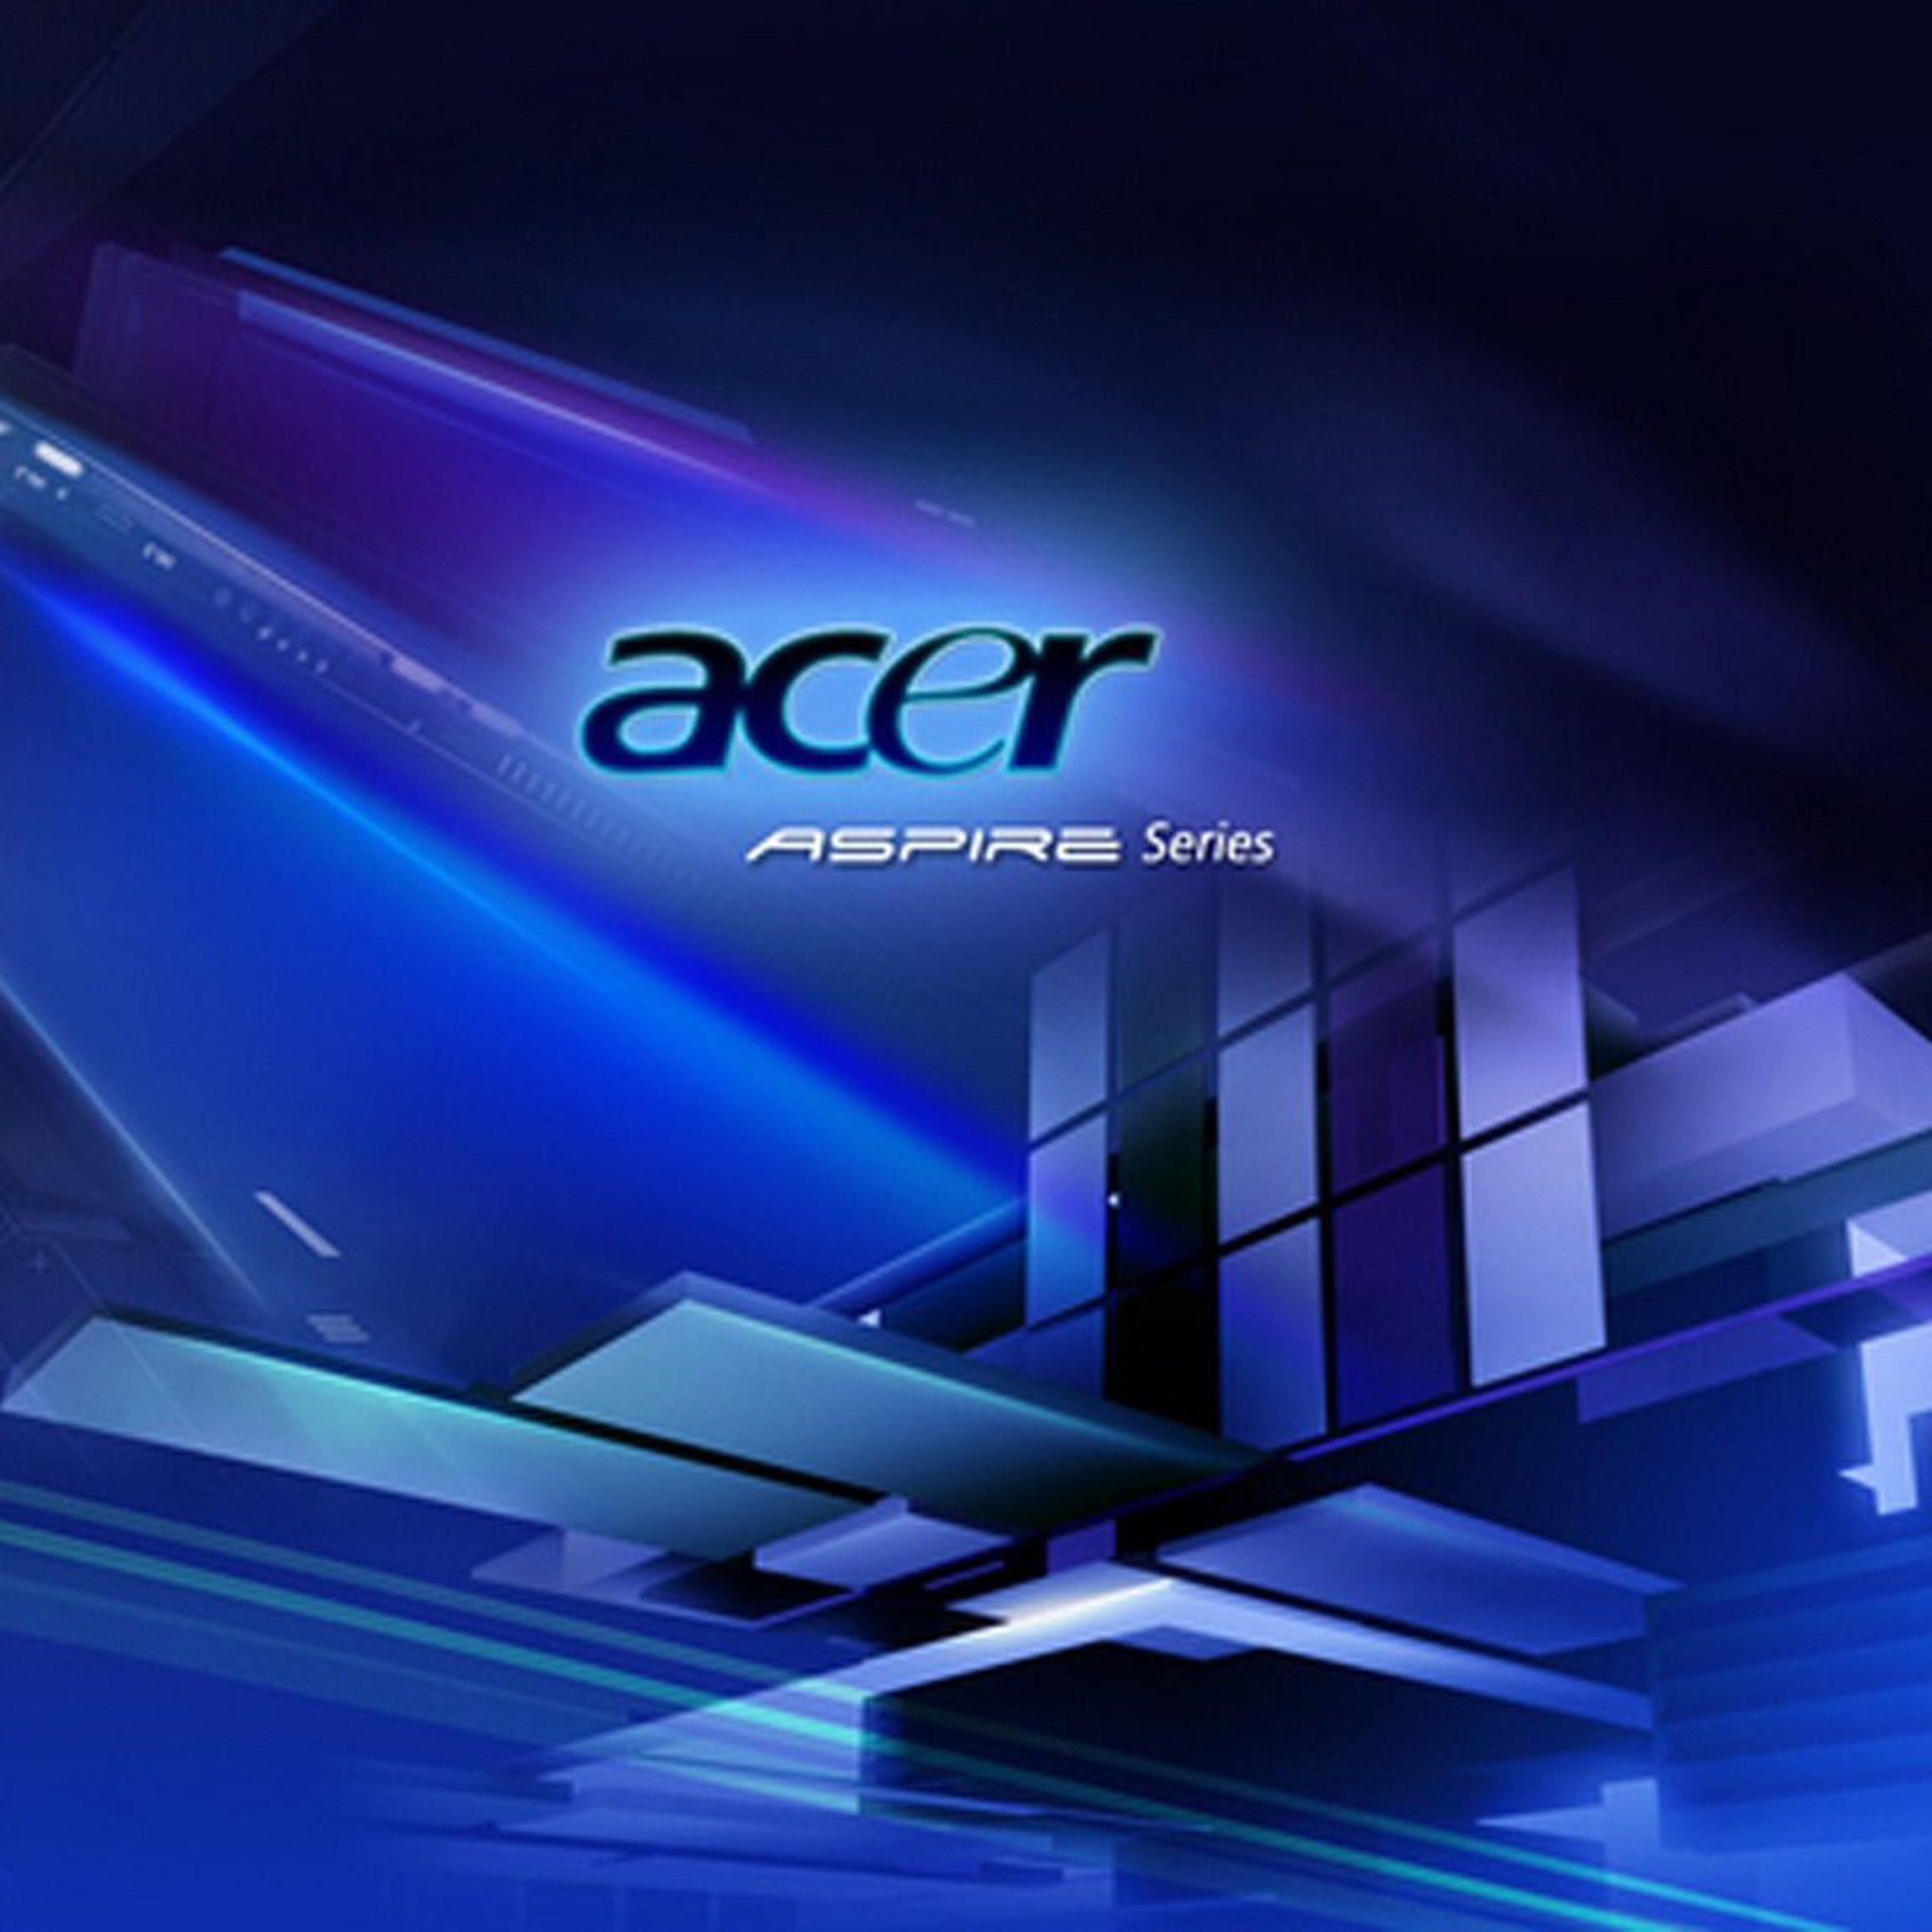 Free Download 07 Acer Aspire Blue Wallpaper Iappsofts Com Ipad